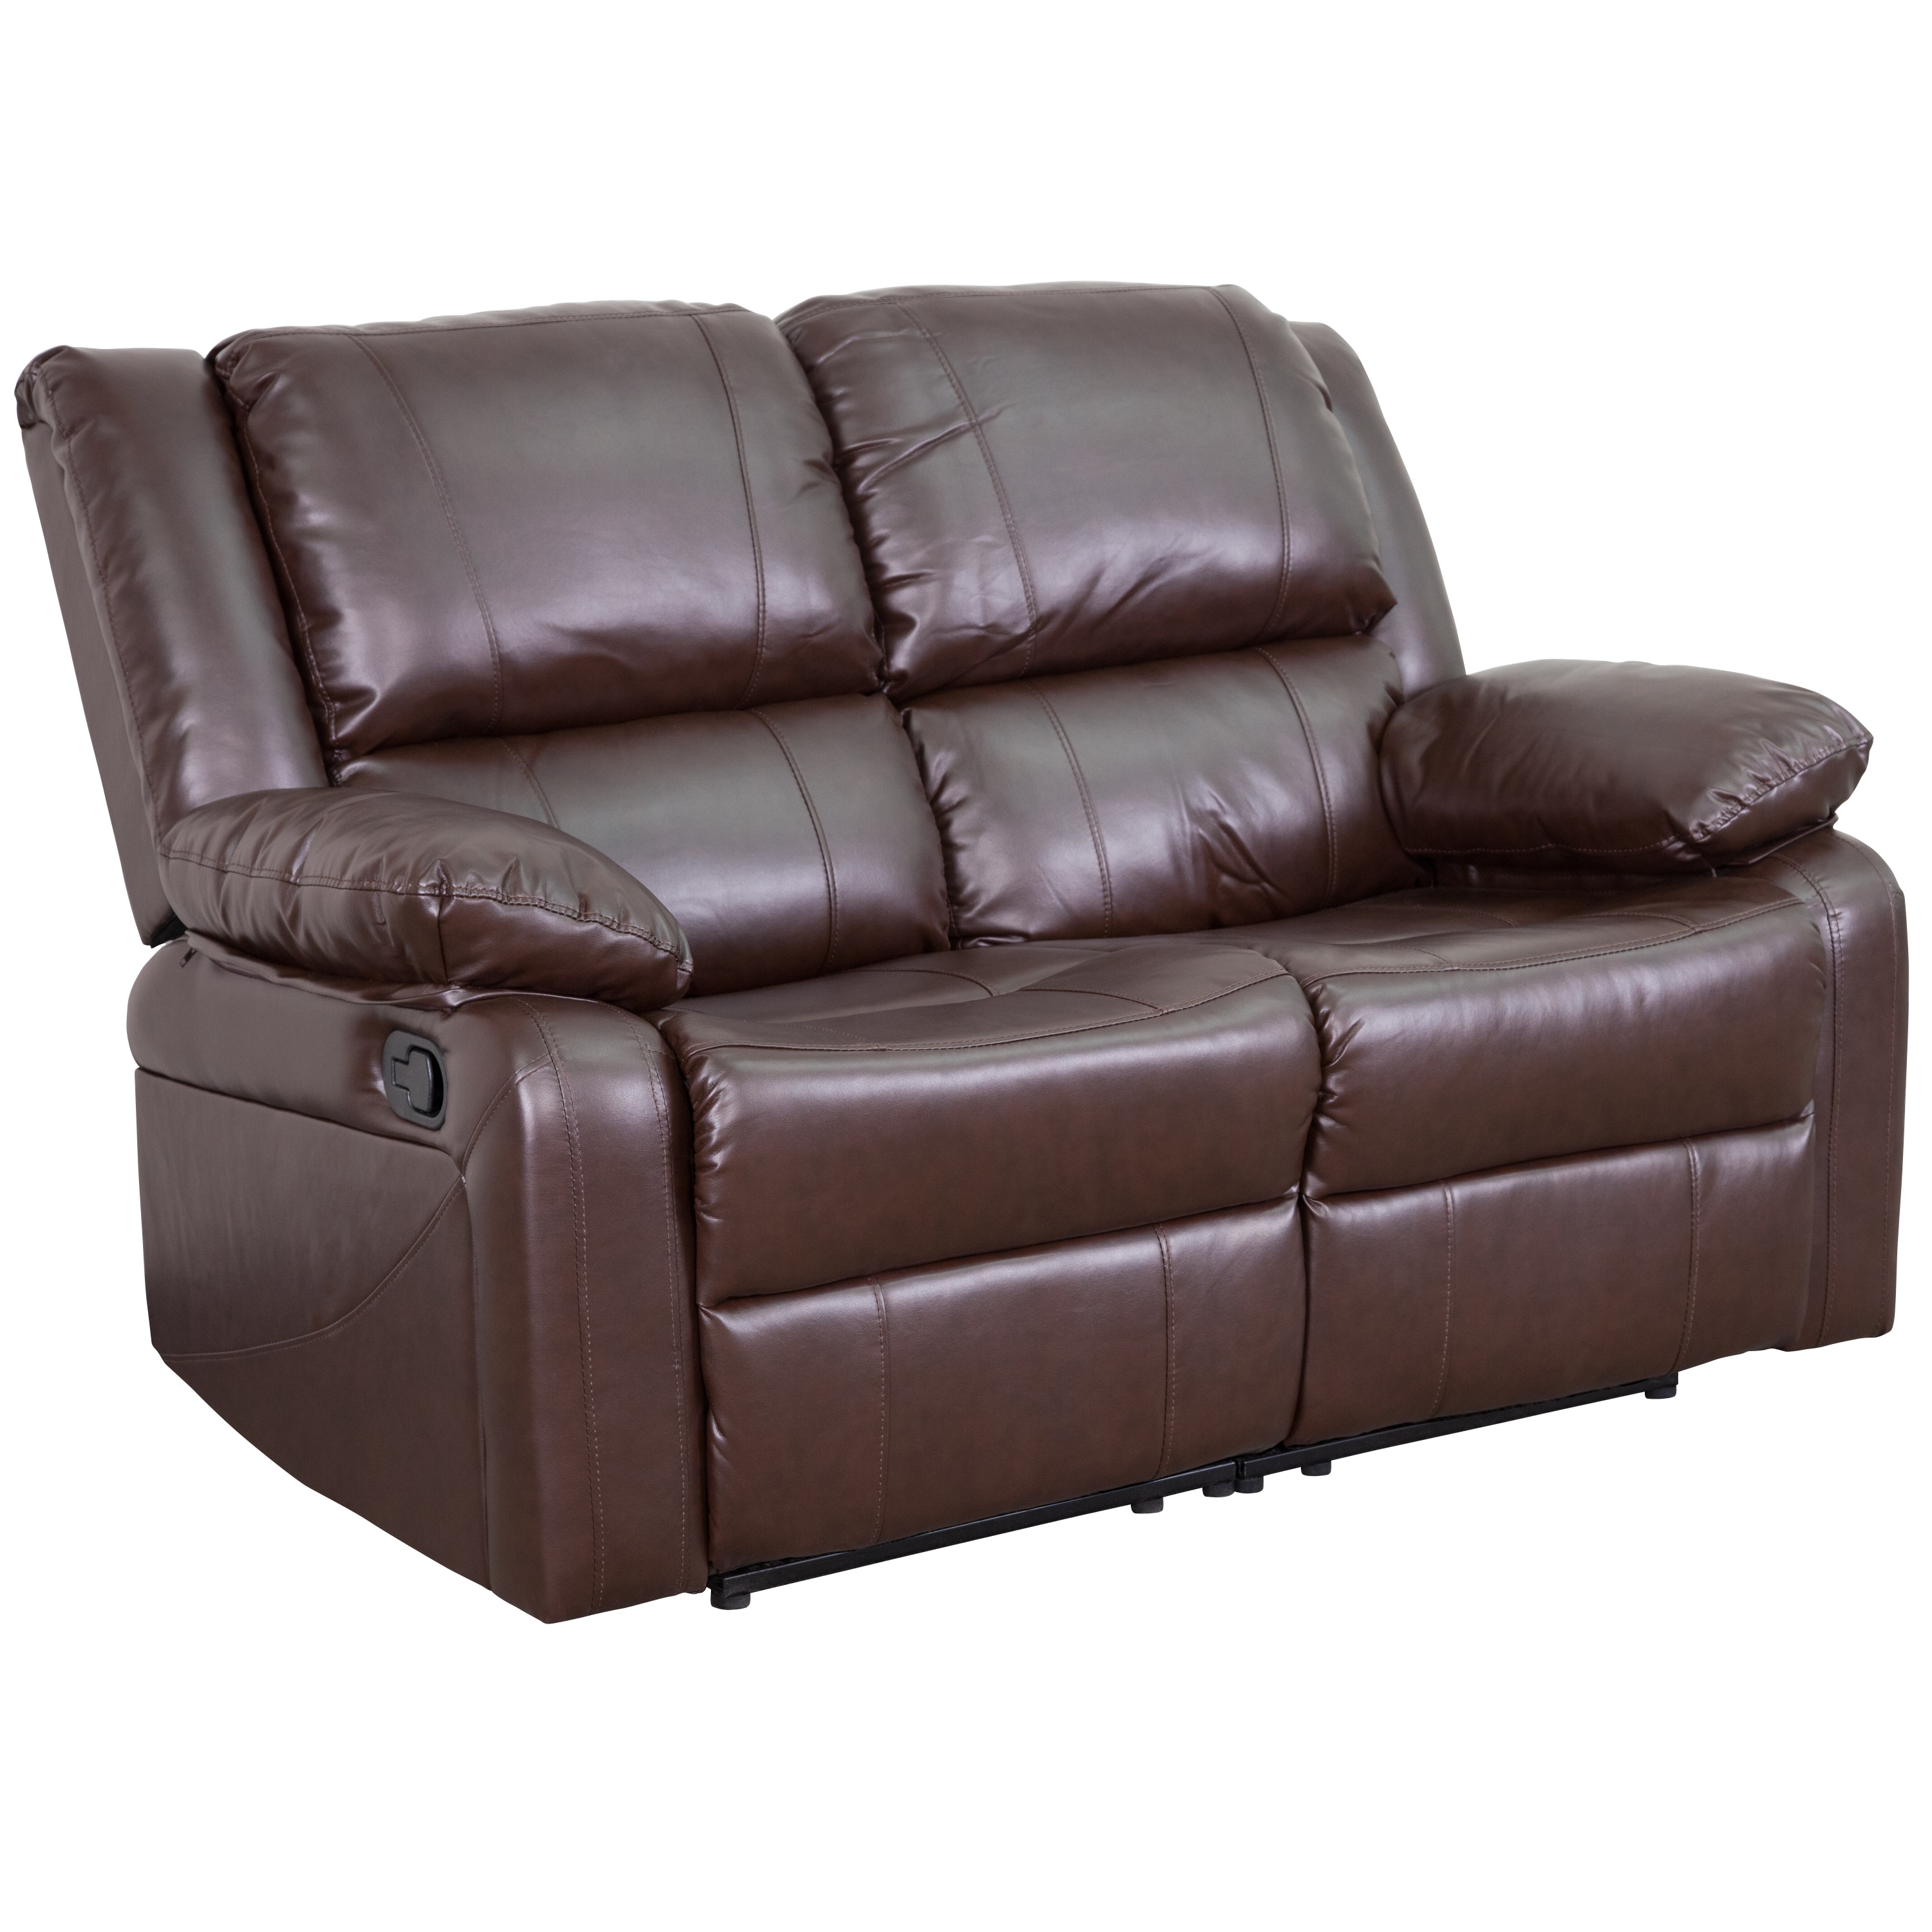 Faux Leather Reclining Loveseat, Is Faux Leather Furniture Good